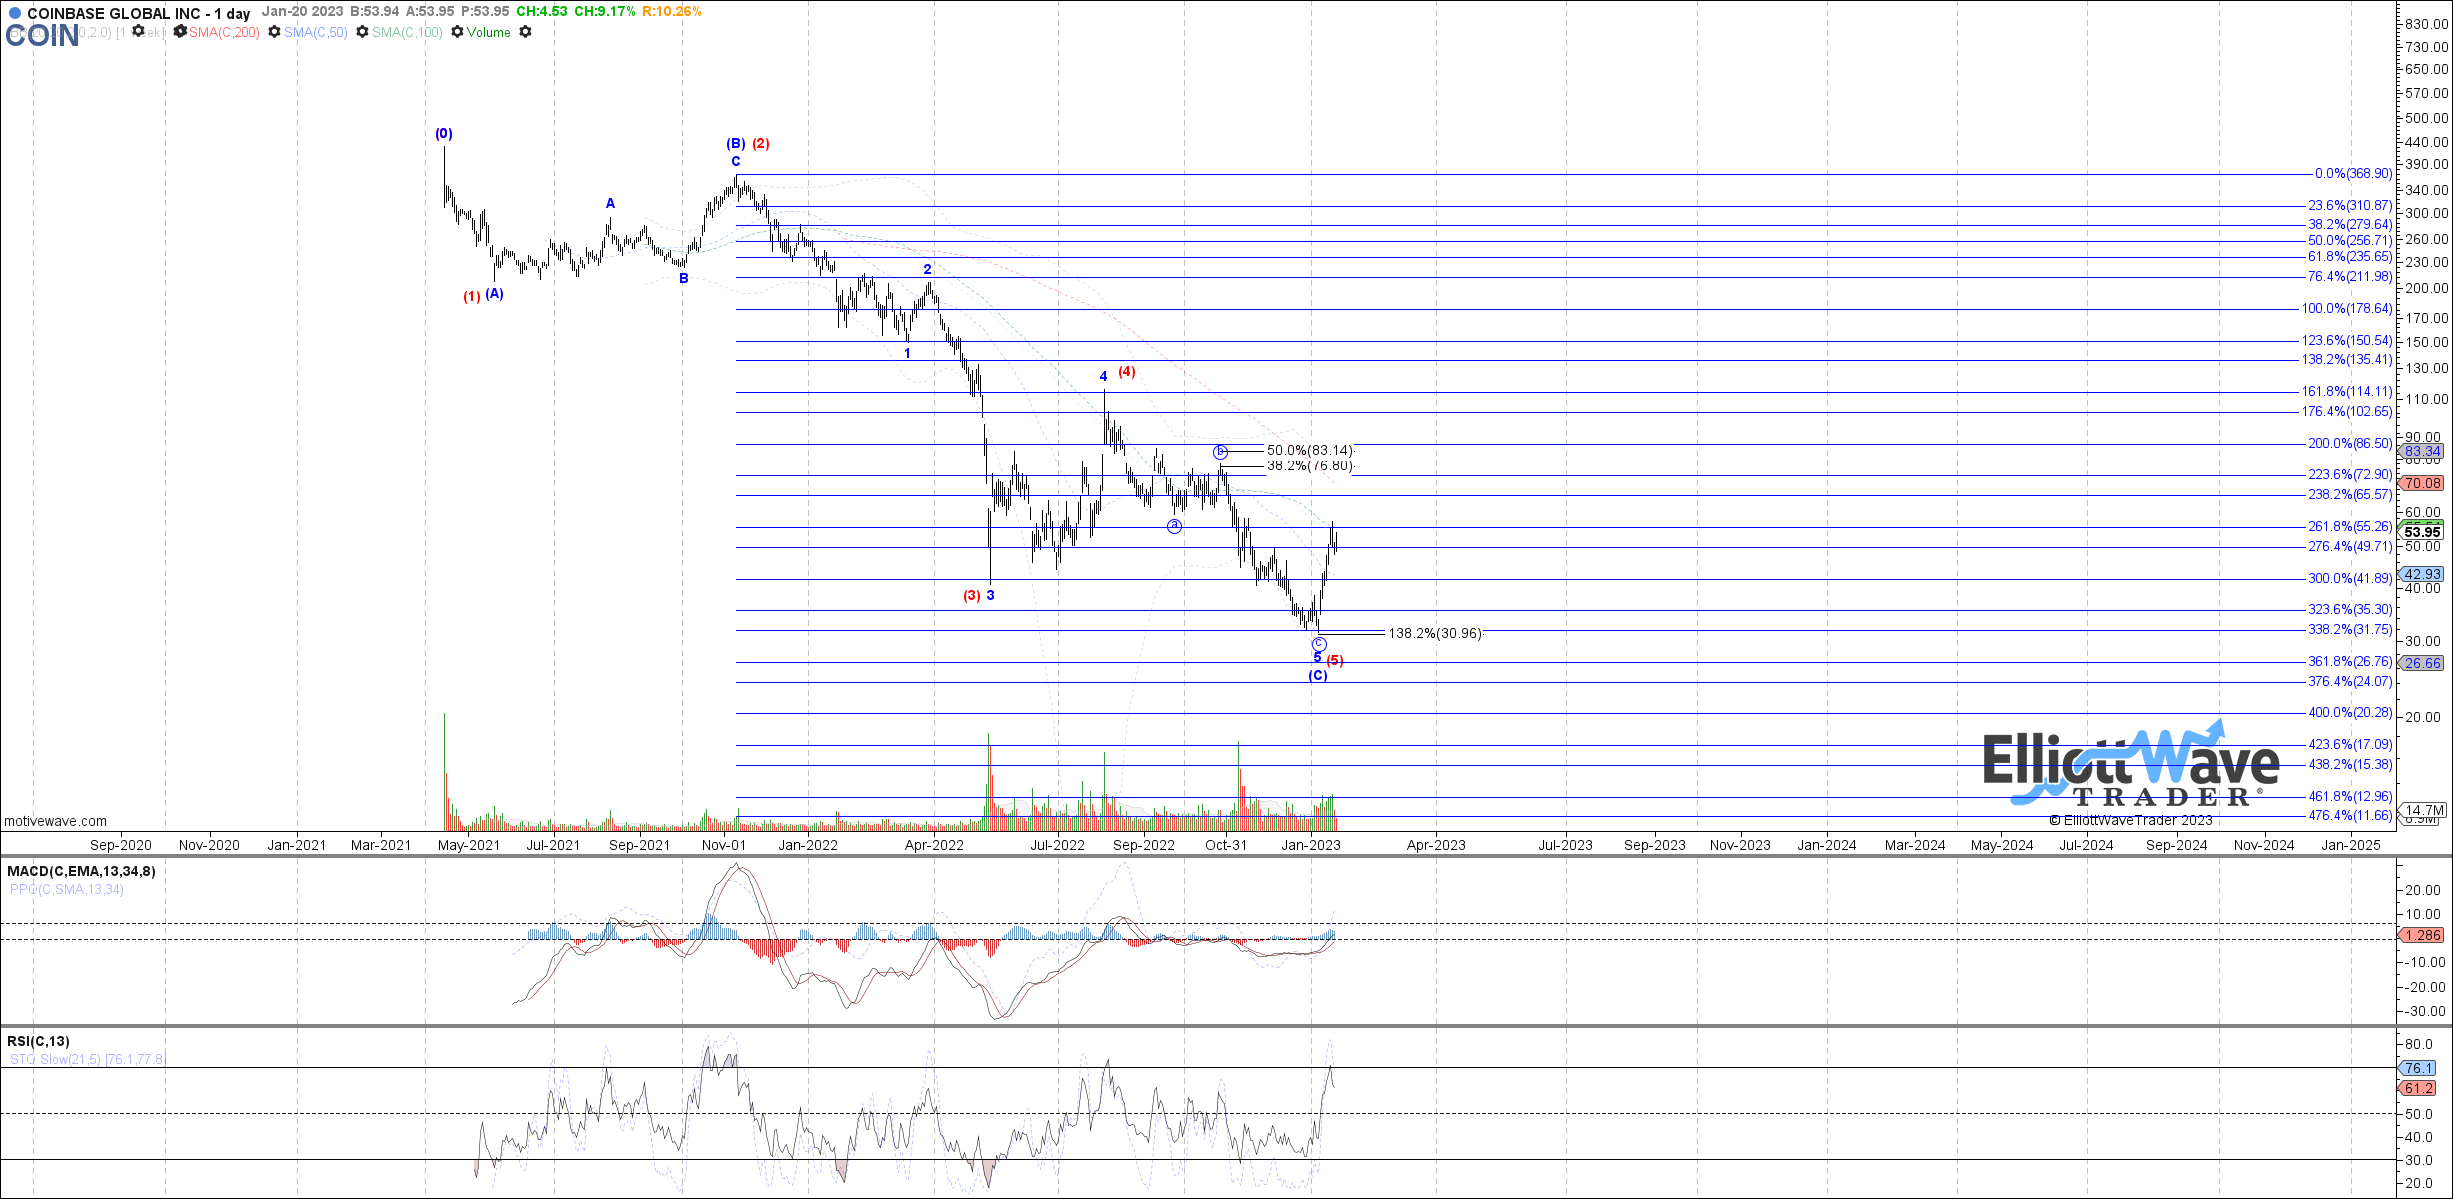 COIN - Primary Analysis - Jan-20 1203 PM (1 day)